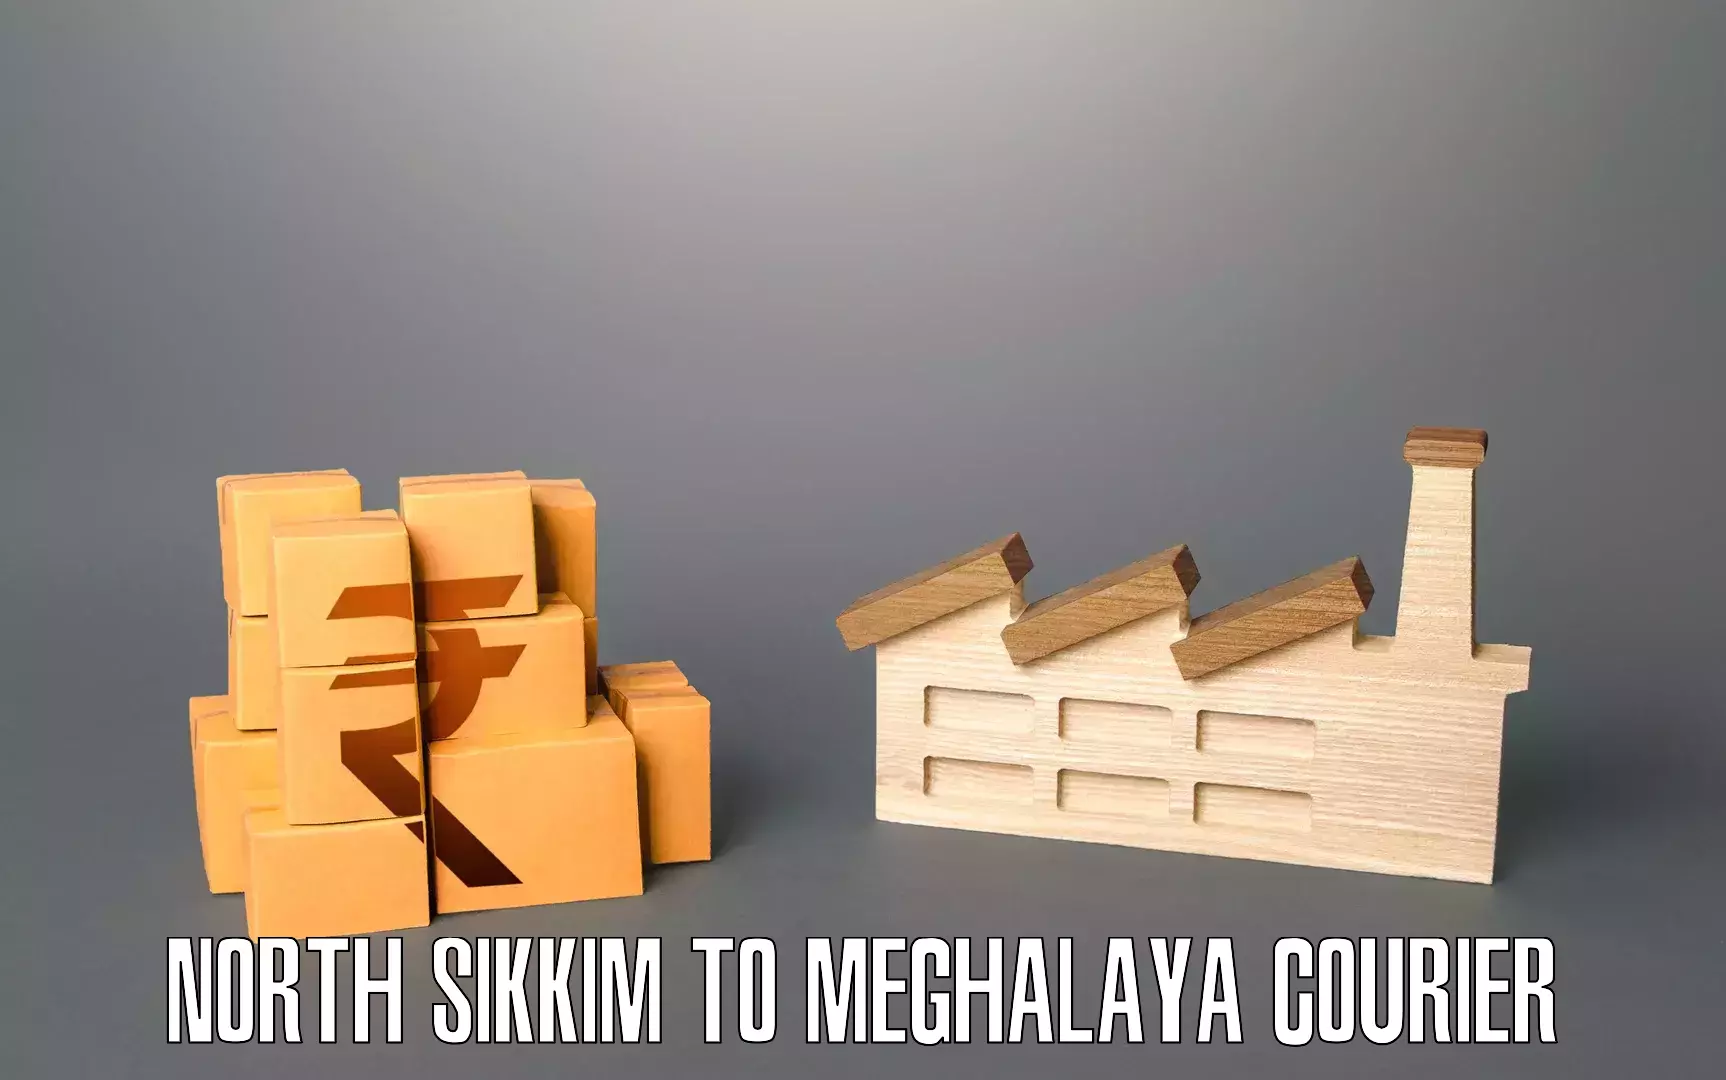 Budget-friendly movers in North Sikkim to Meghalaya